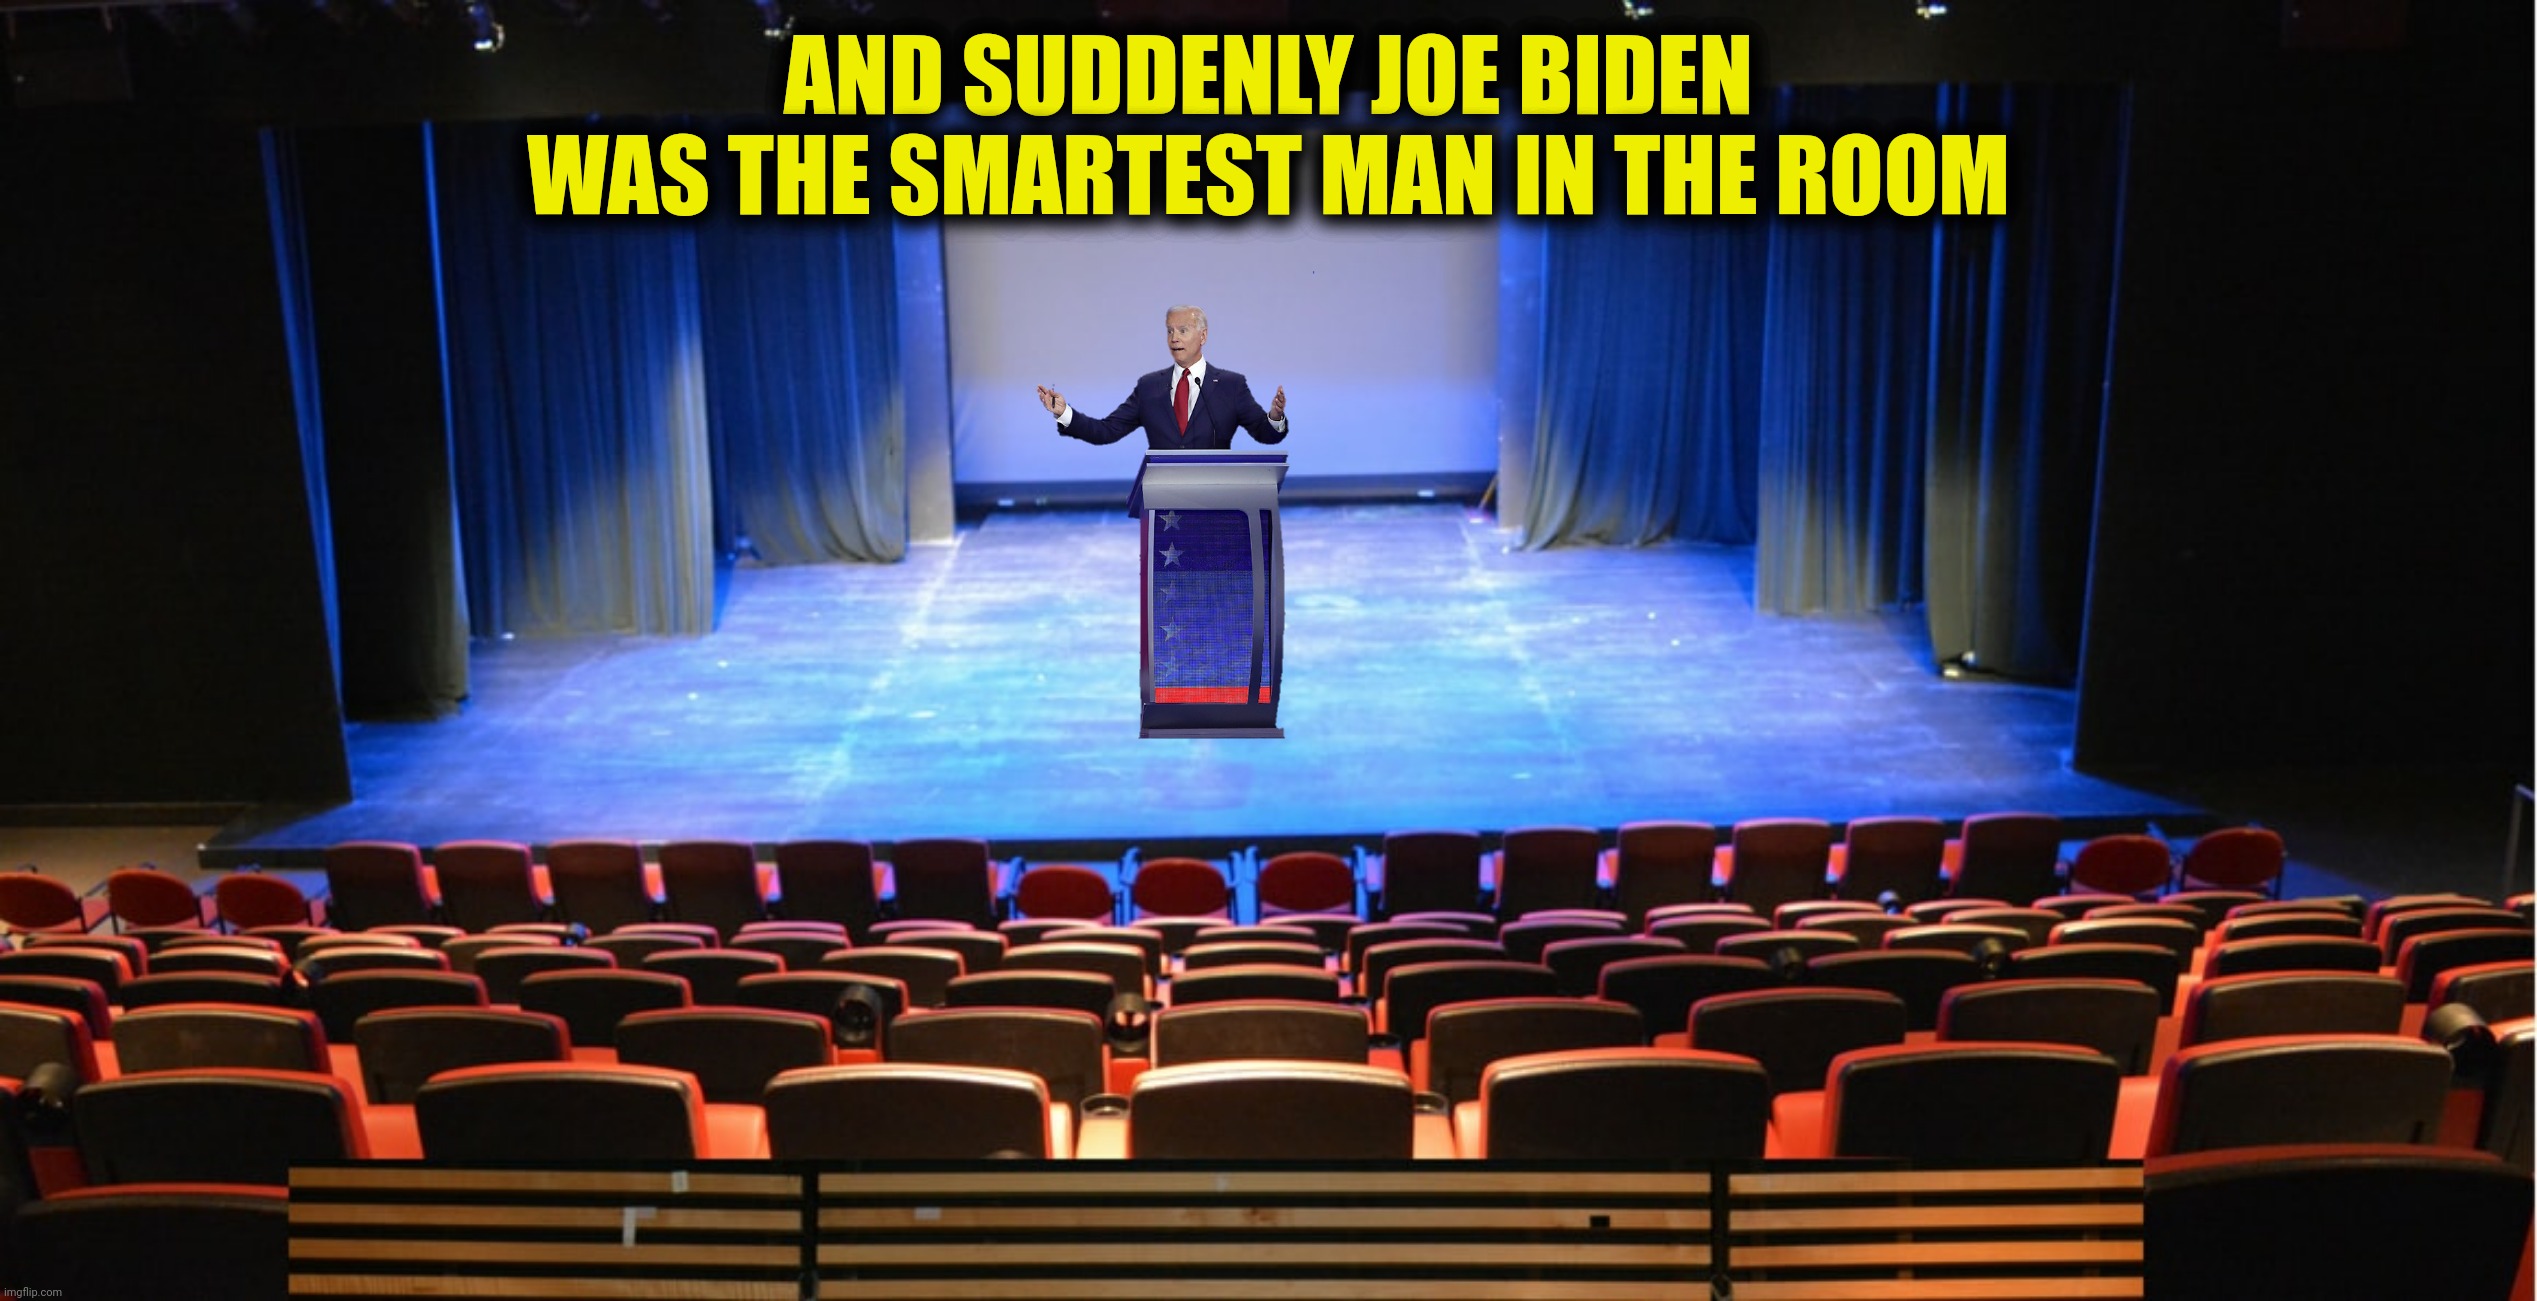 AND SUDDENLY JOE BIDEN WAS THE SMARTEST MAN IN THE ROOM | made w/ Imgflip meme maker